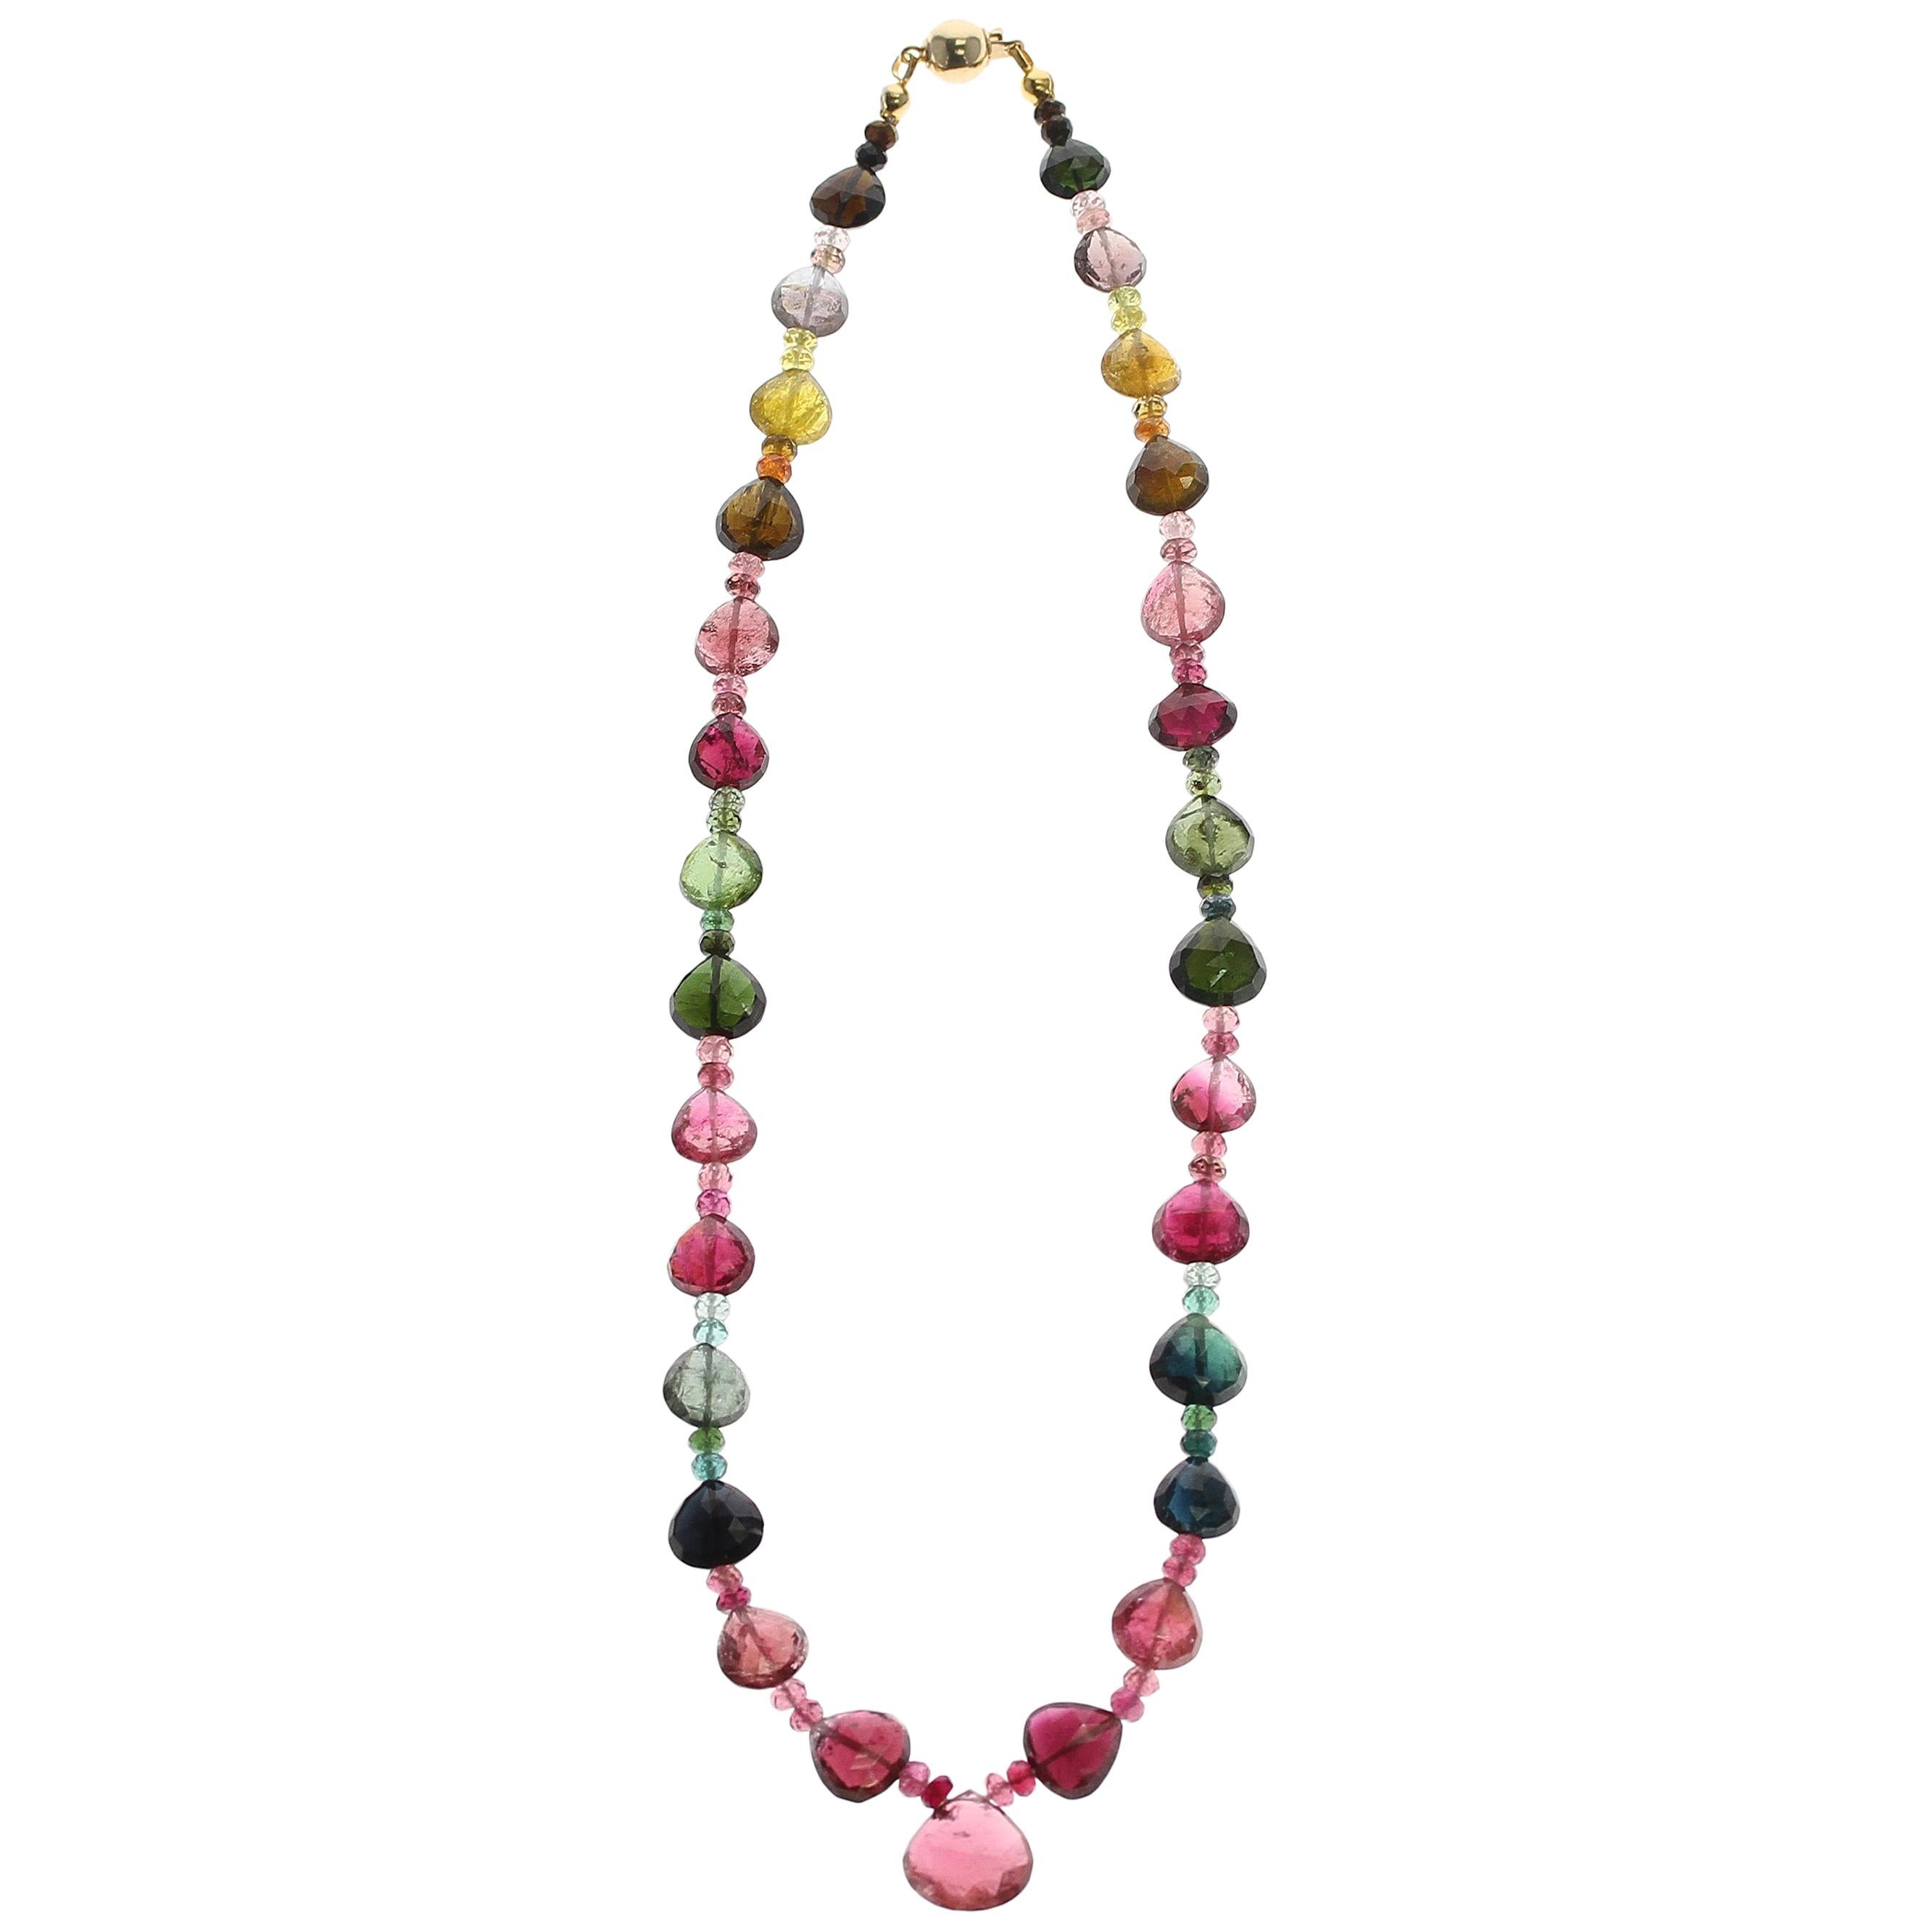 Tourmaline Faceted Drops with Beads Necklace, Yellow Gold-Plated Clasp